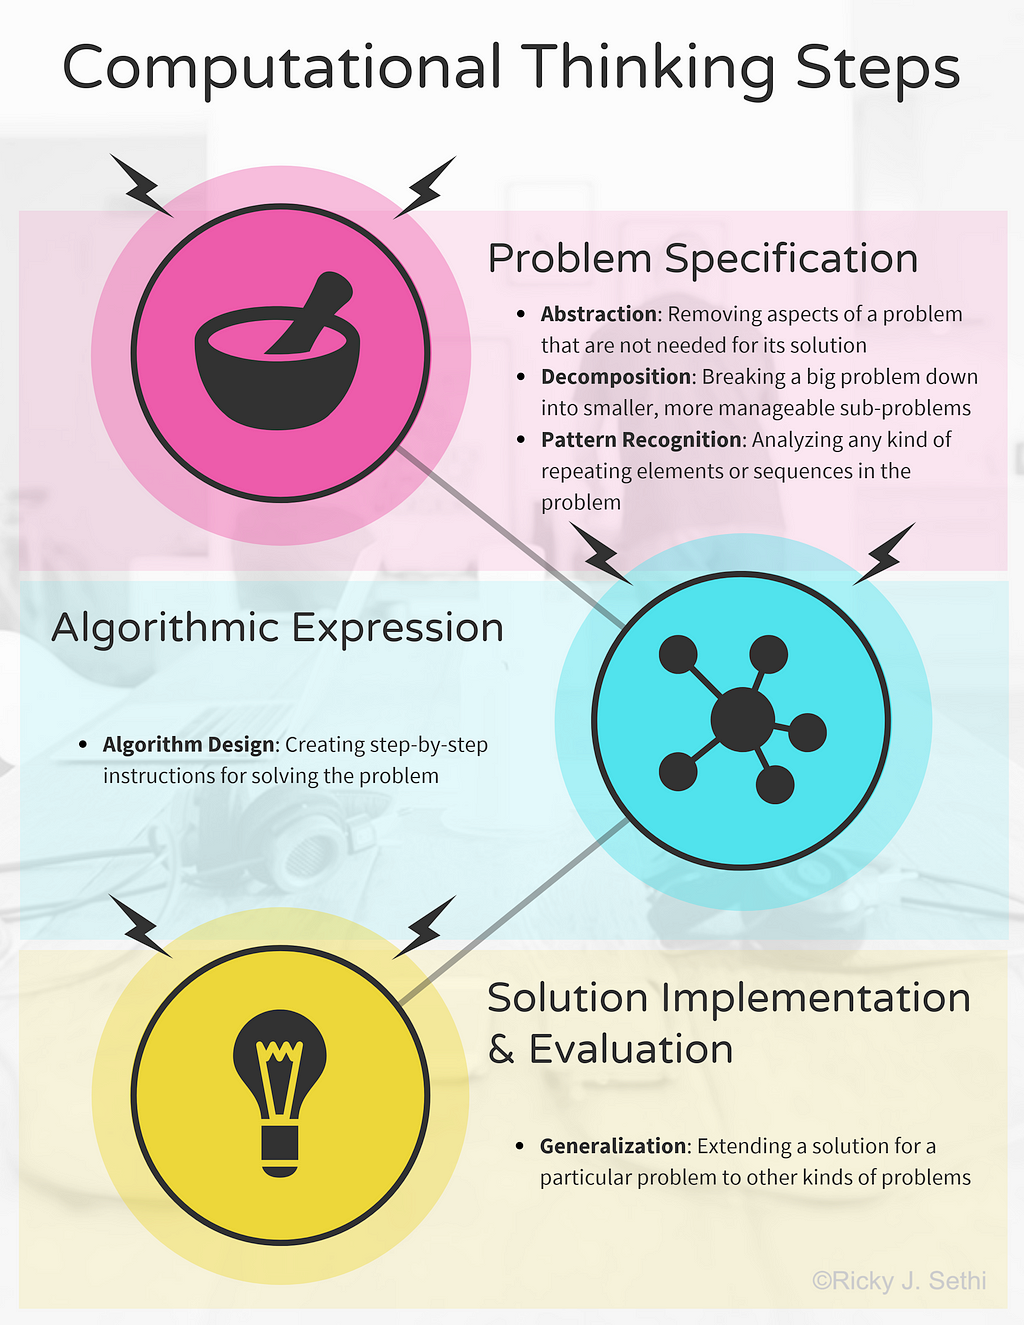 Computational Thinking Overview: The steps involved in computational thinking are: Problem Specification (Abstraction, Decomposition, and Pattern Recognition), Algorithmic Expression (Algorithm Design), and Solution Implementation & Evaluation (Generalization). Copyright Ricky J. Sethi